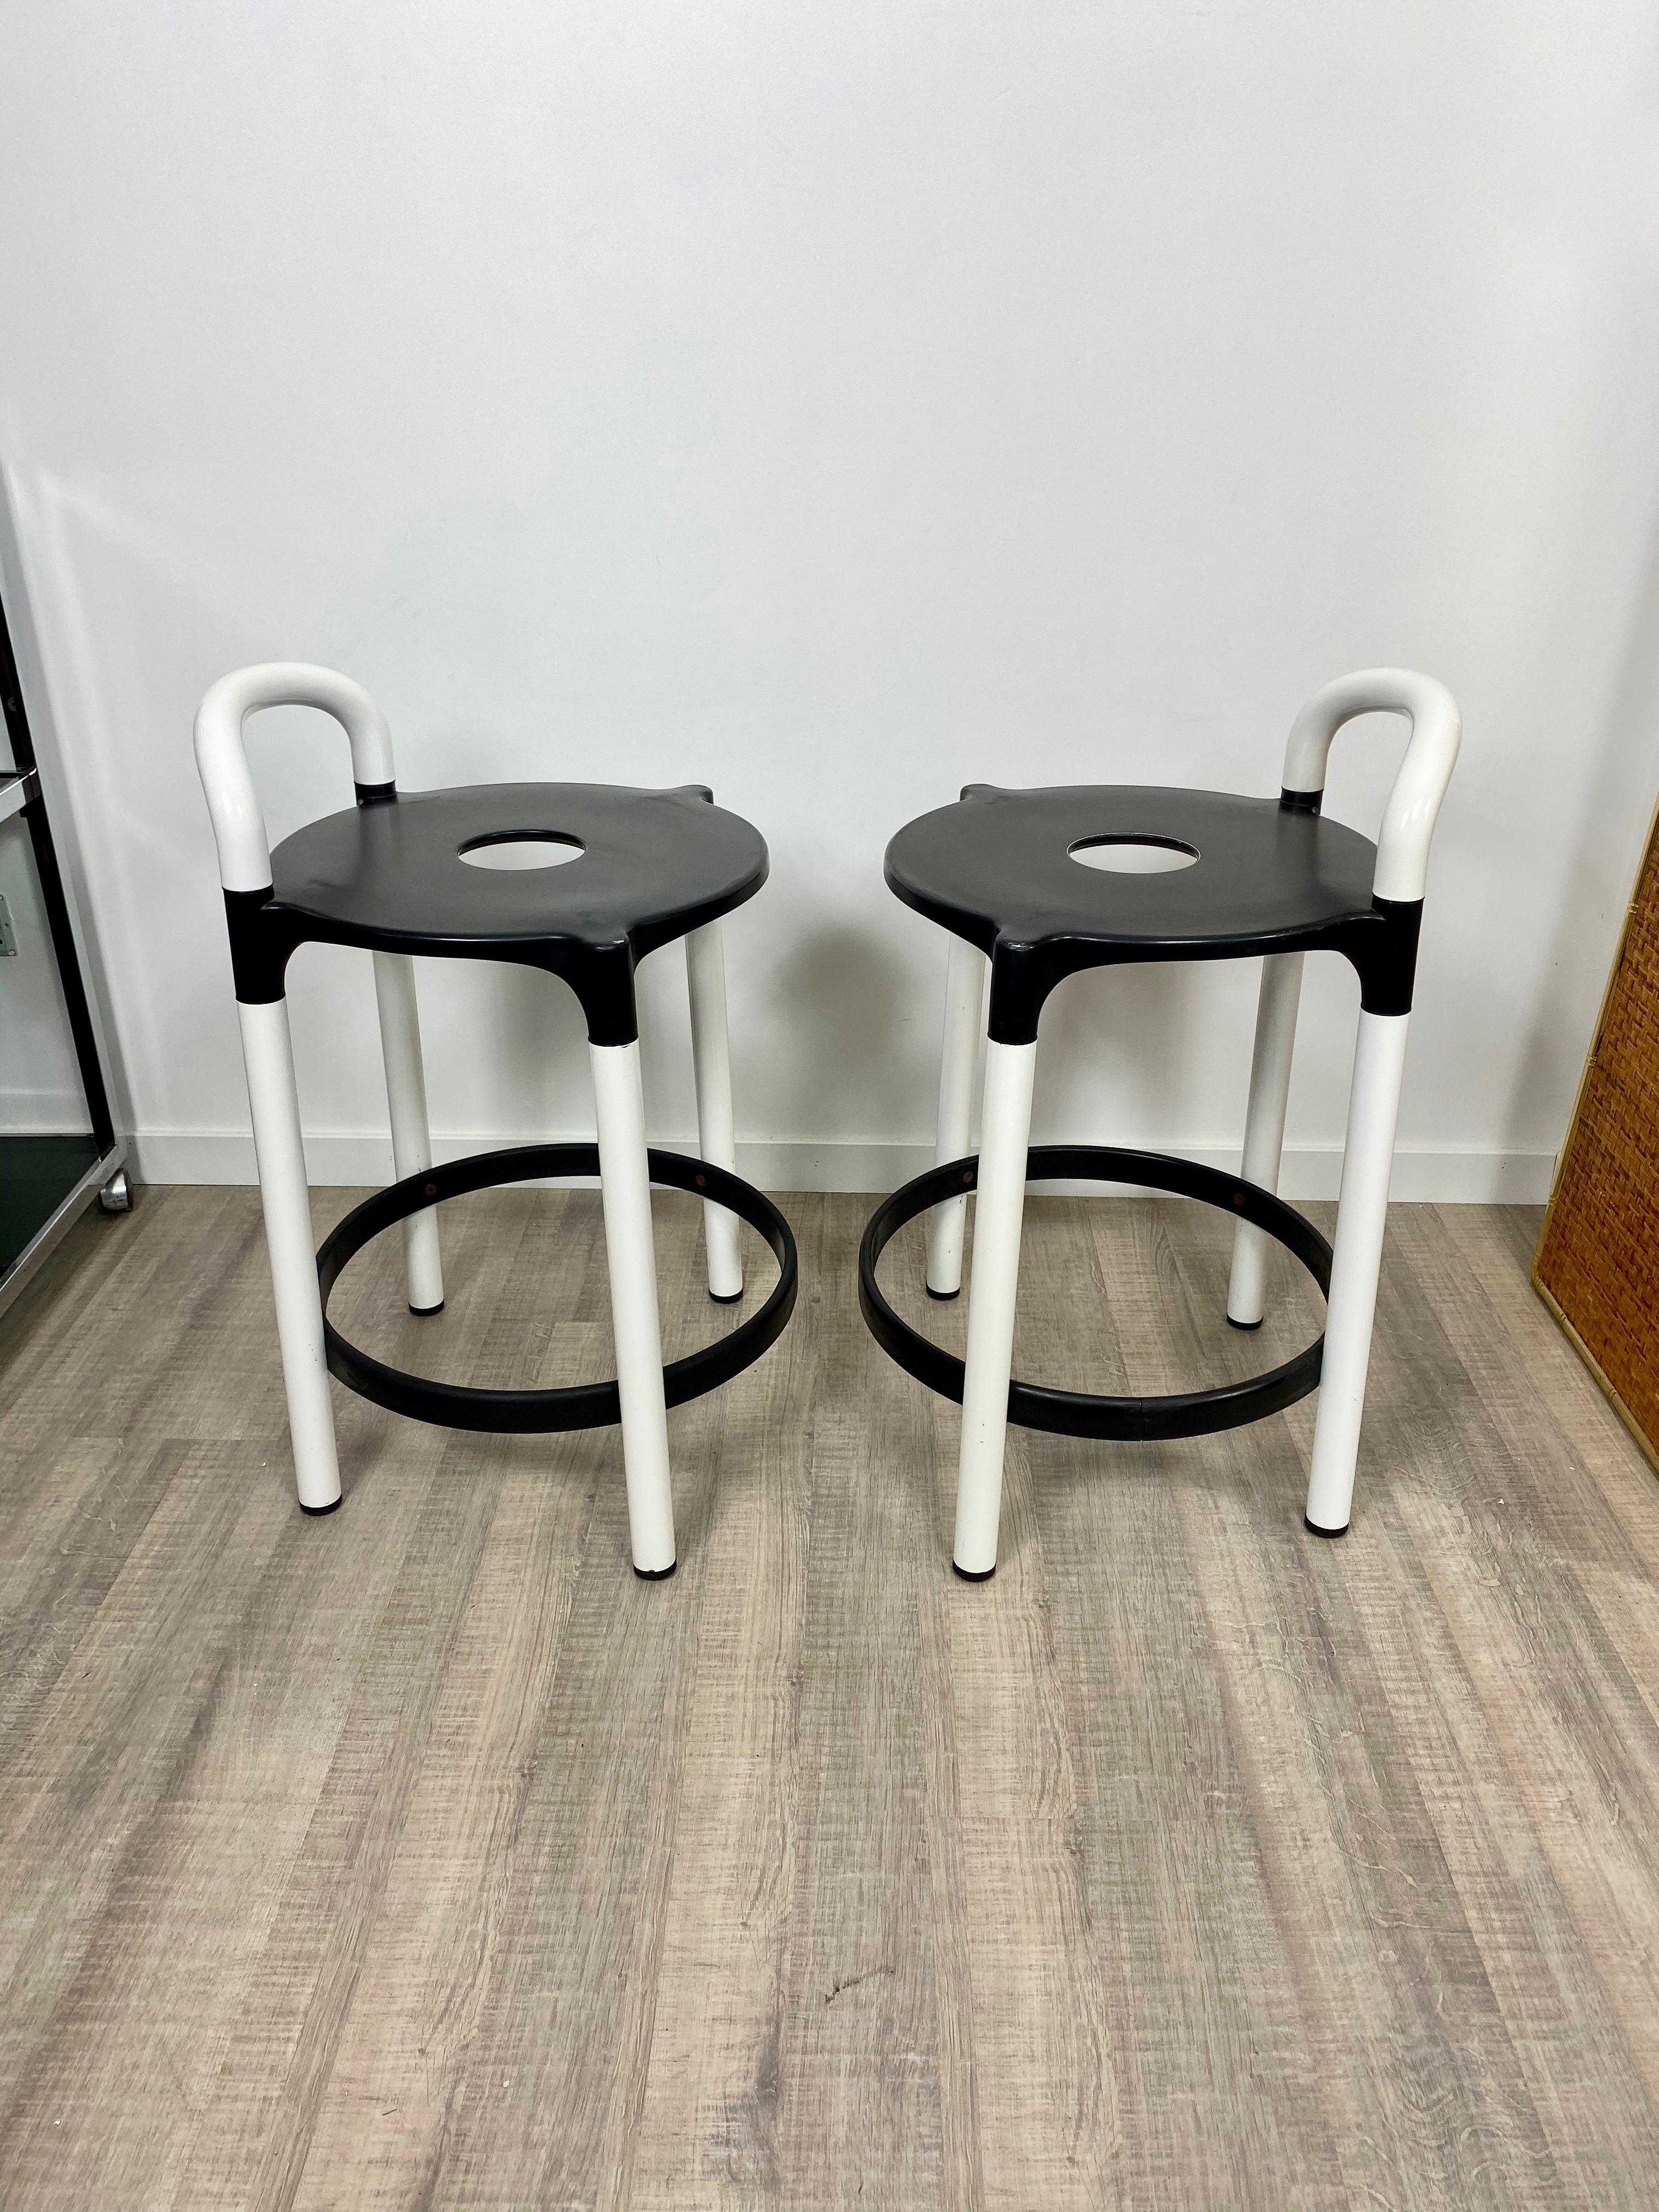 Pair of Postmodern Stools by Anna Casatelli Ferrieri for Kartell, Italy, 1980s For Sale 1